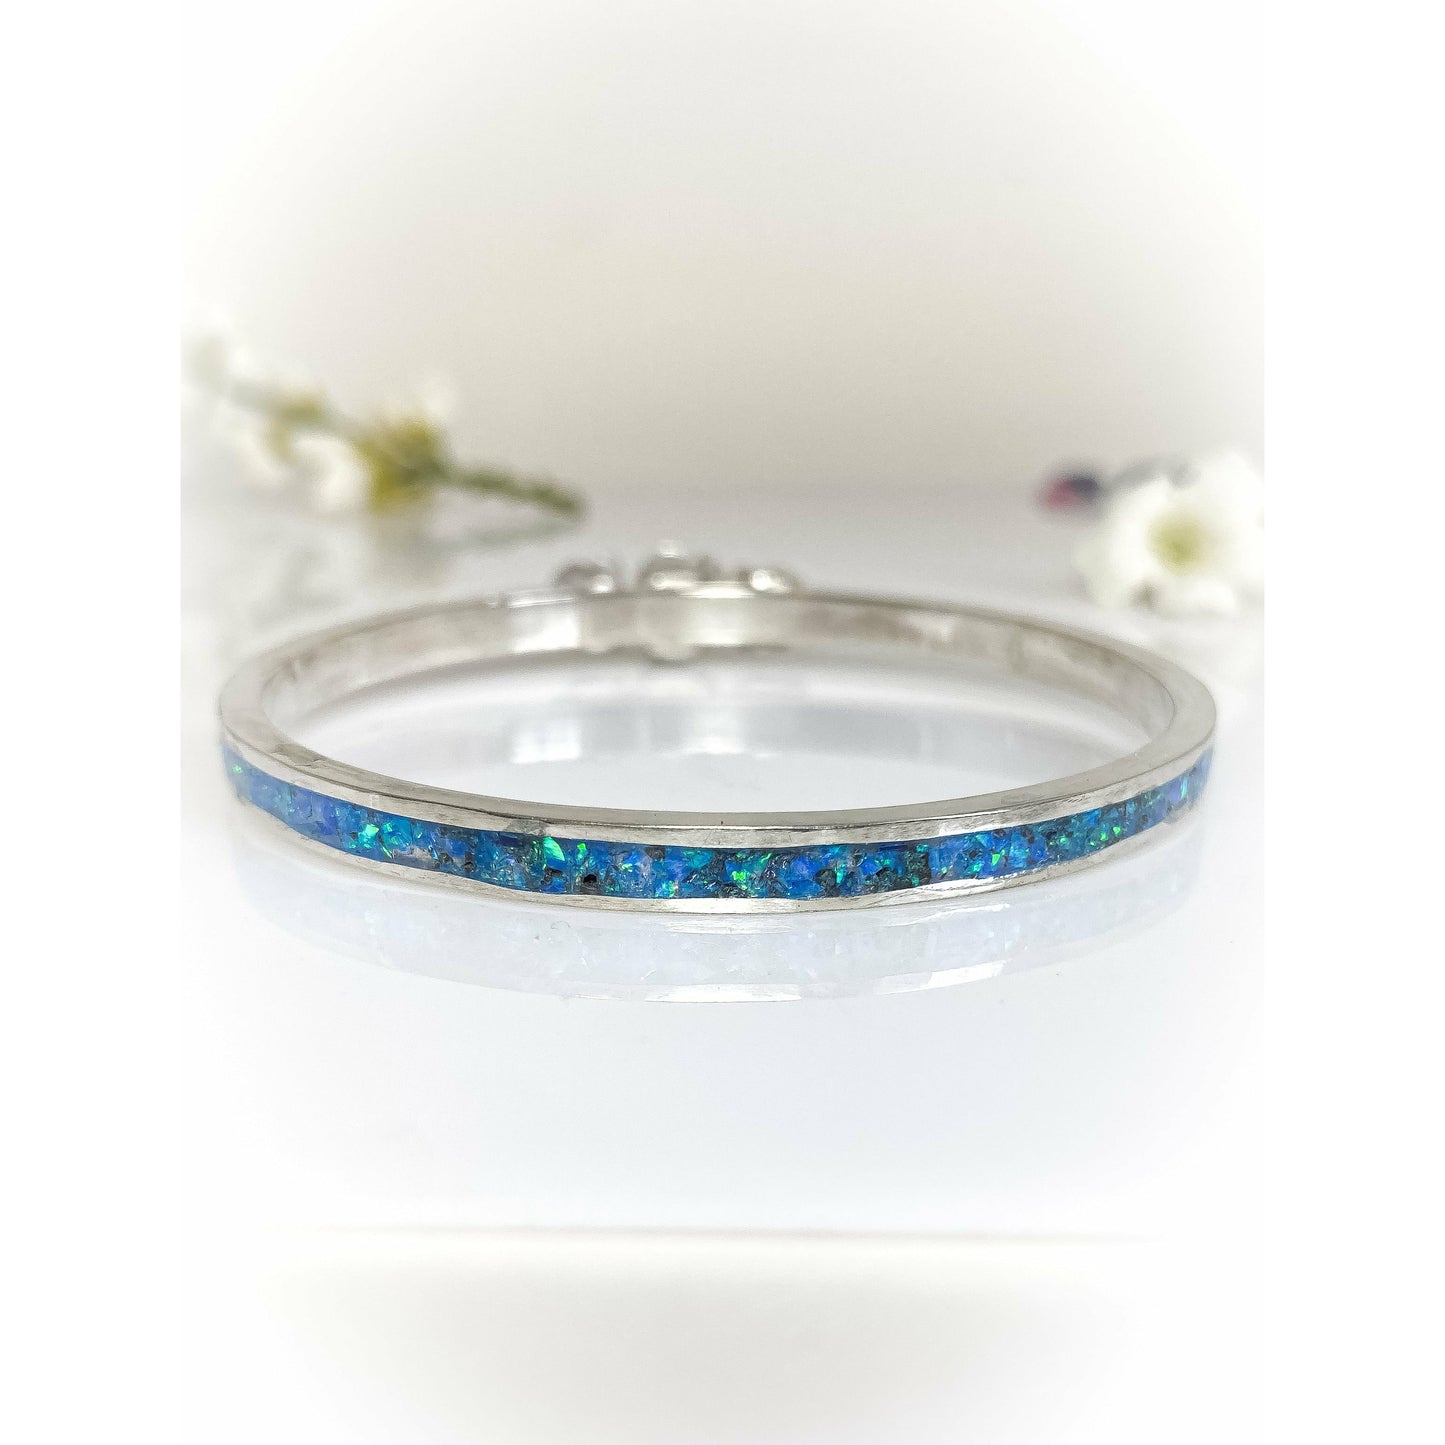 Australian Blue Opal Inlay Bracelet with Three Sterling Silver Roses